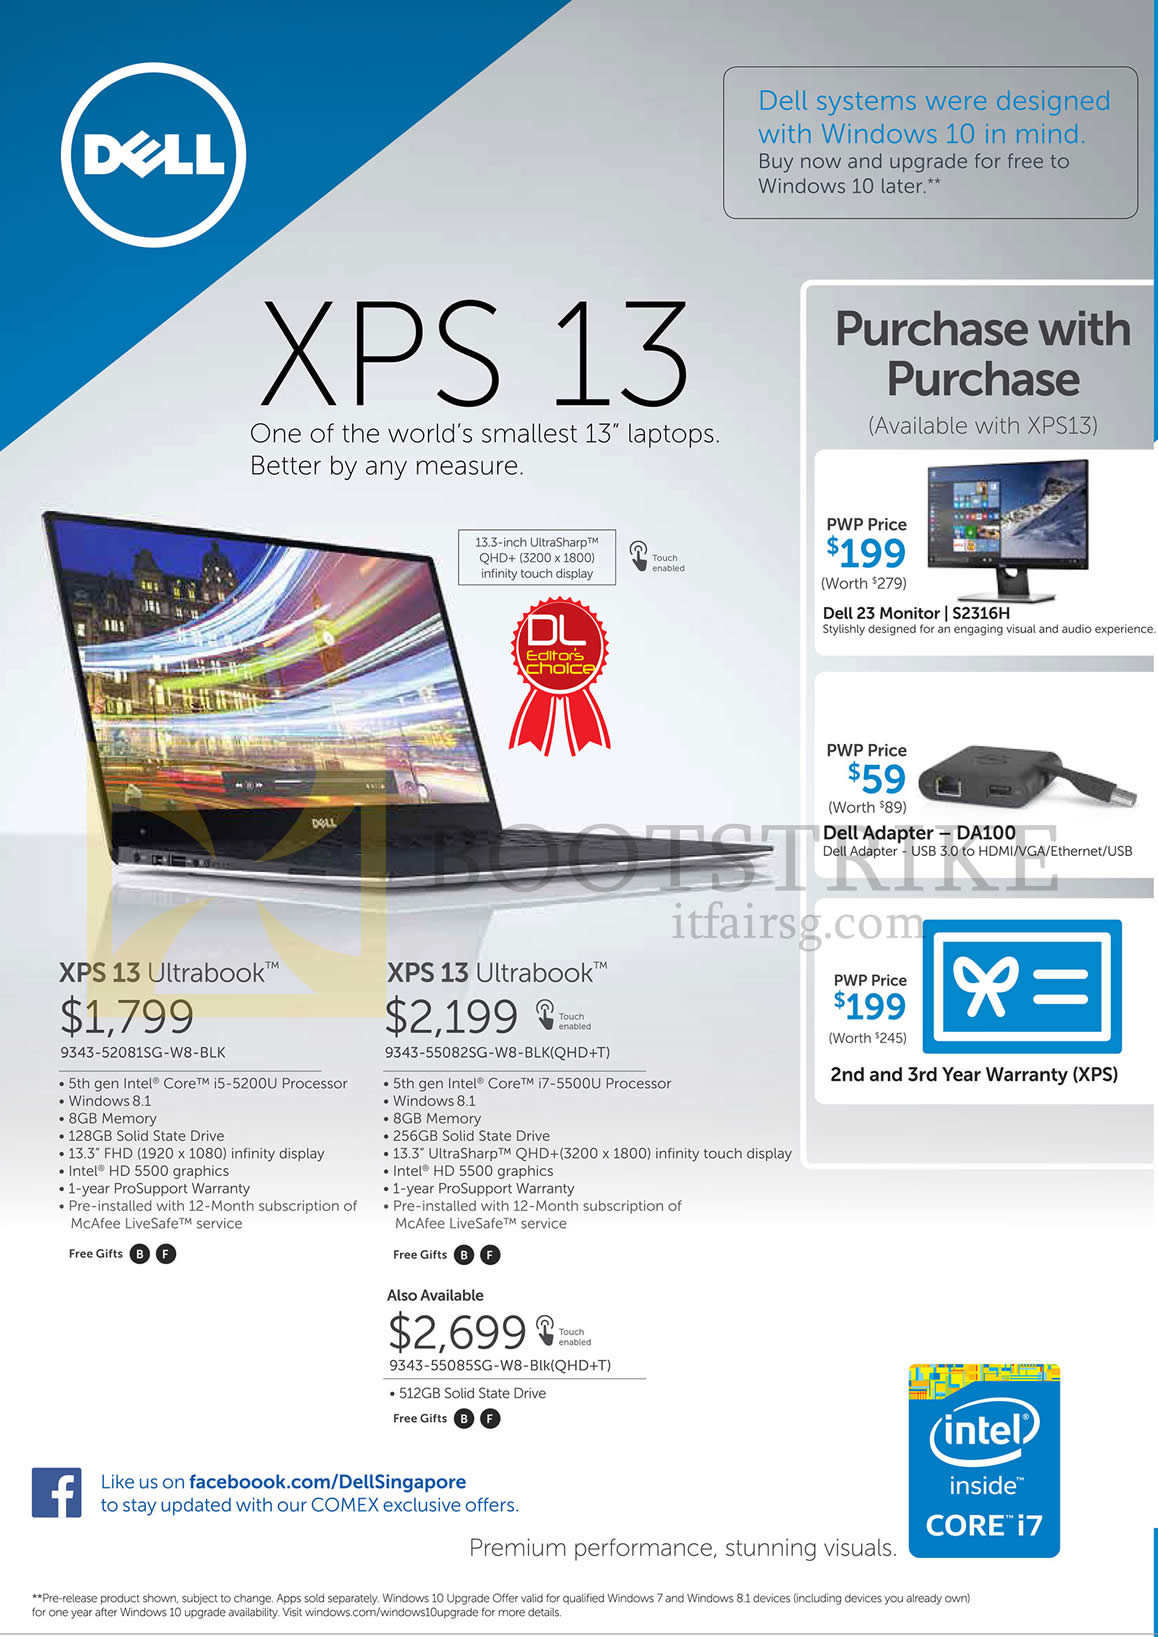 COMEX 2015 price list image brochure of Dell Notebooks, Purchase With Purchase, XPS 13 9343-52081SG-W8-BLK, XPS 13 9343-55082SG-W8-BLK QHD+T